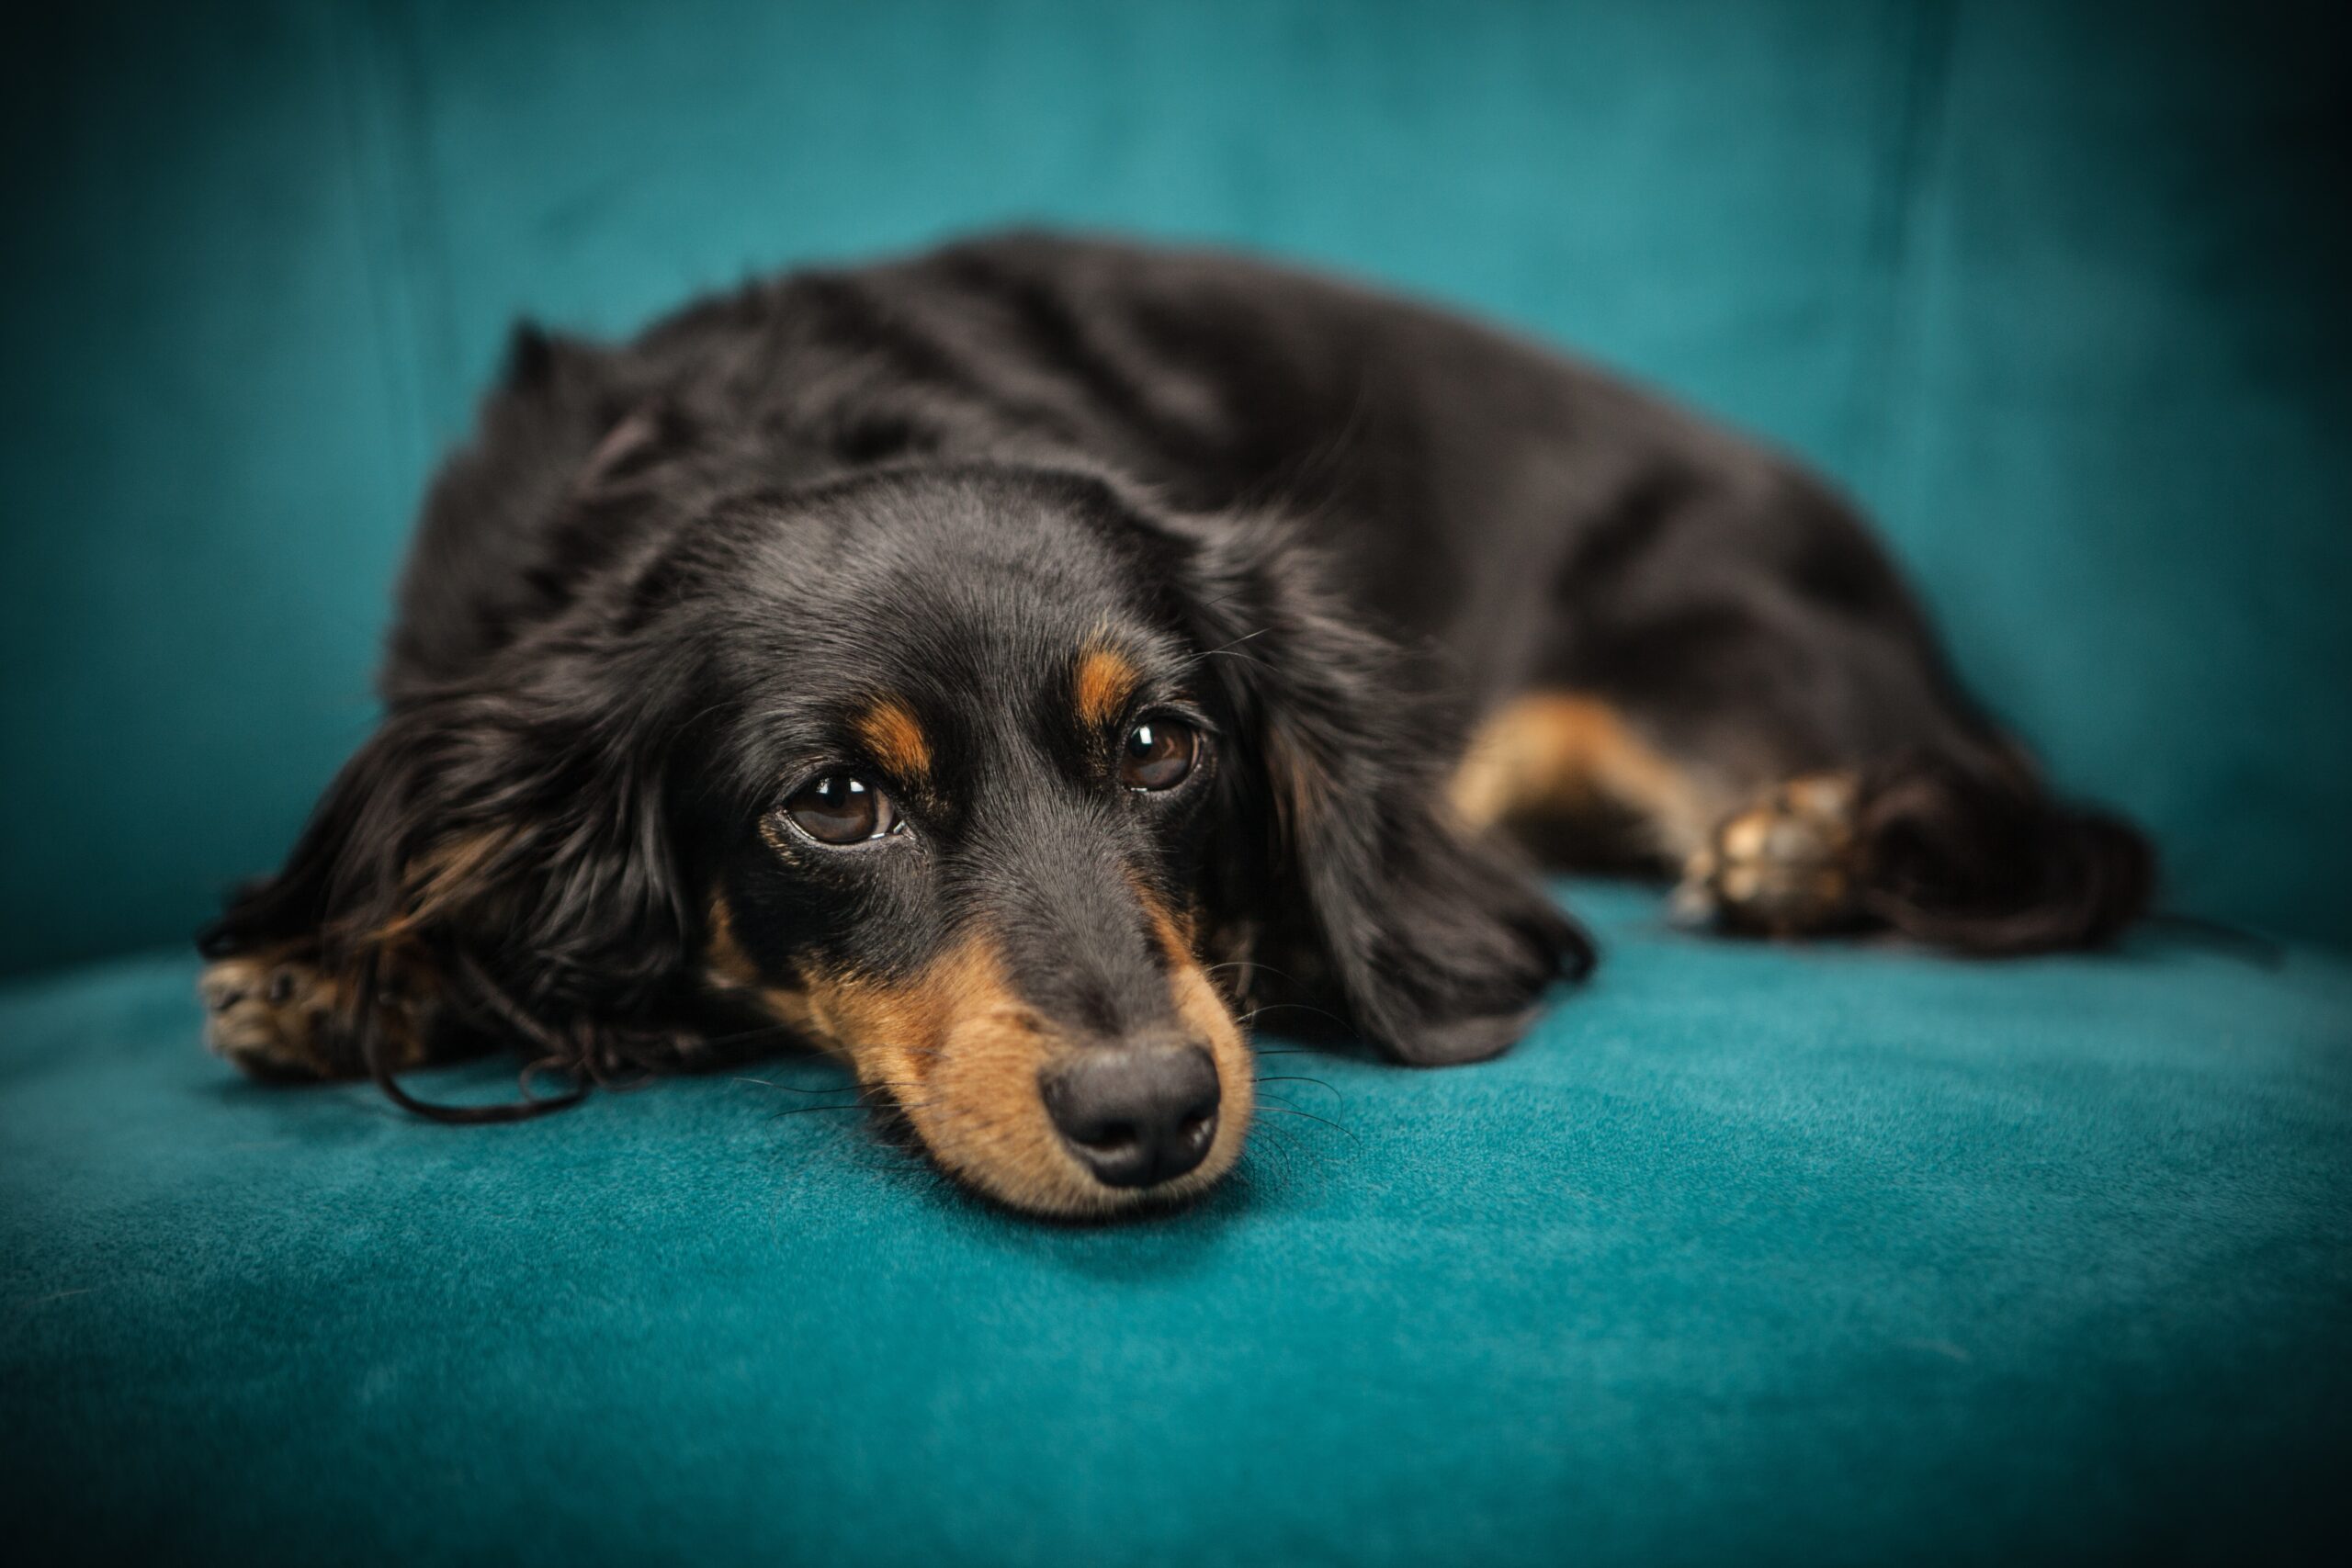 Black and brown Dachshund on blue couch